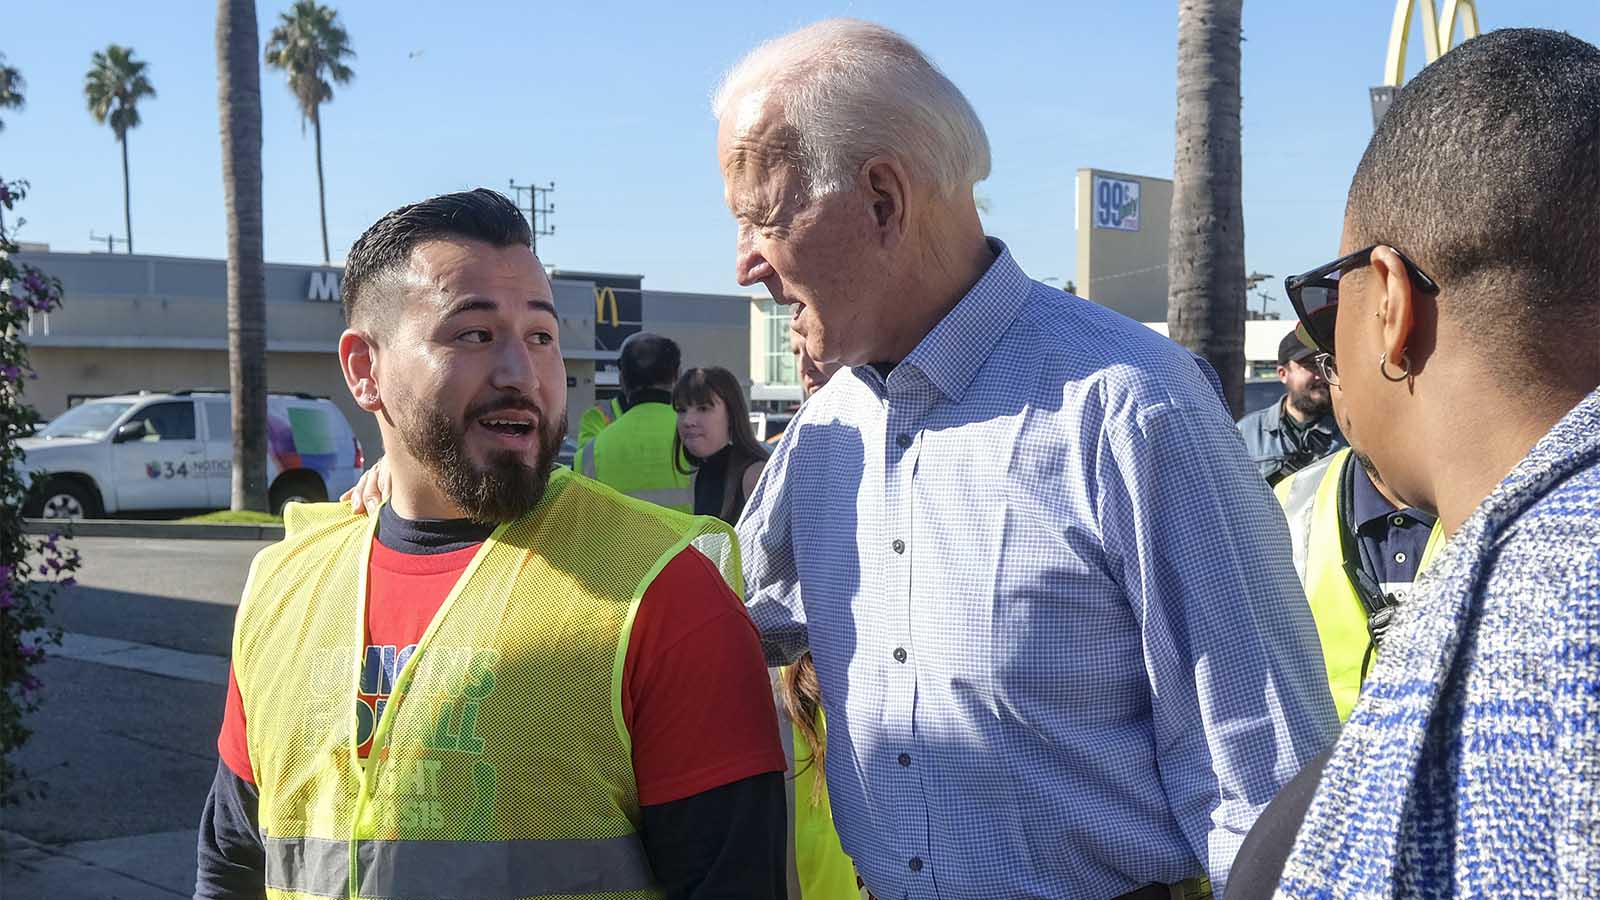 Democratic presidential candidate former Vice President Joe Biden, leaves after speaking at a rally in support of McDonald's cooks and cashiers demanding higher wages and union rights, outside a McDonald's restaurant in Los Angeles, Thursday, Dec. 19, 2019. (AP Photo/Ringo H.W. Chiu)